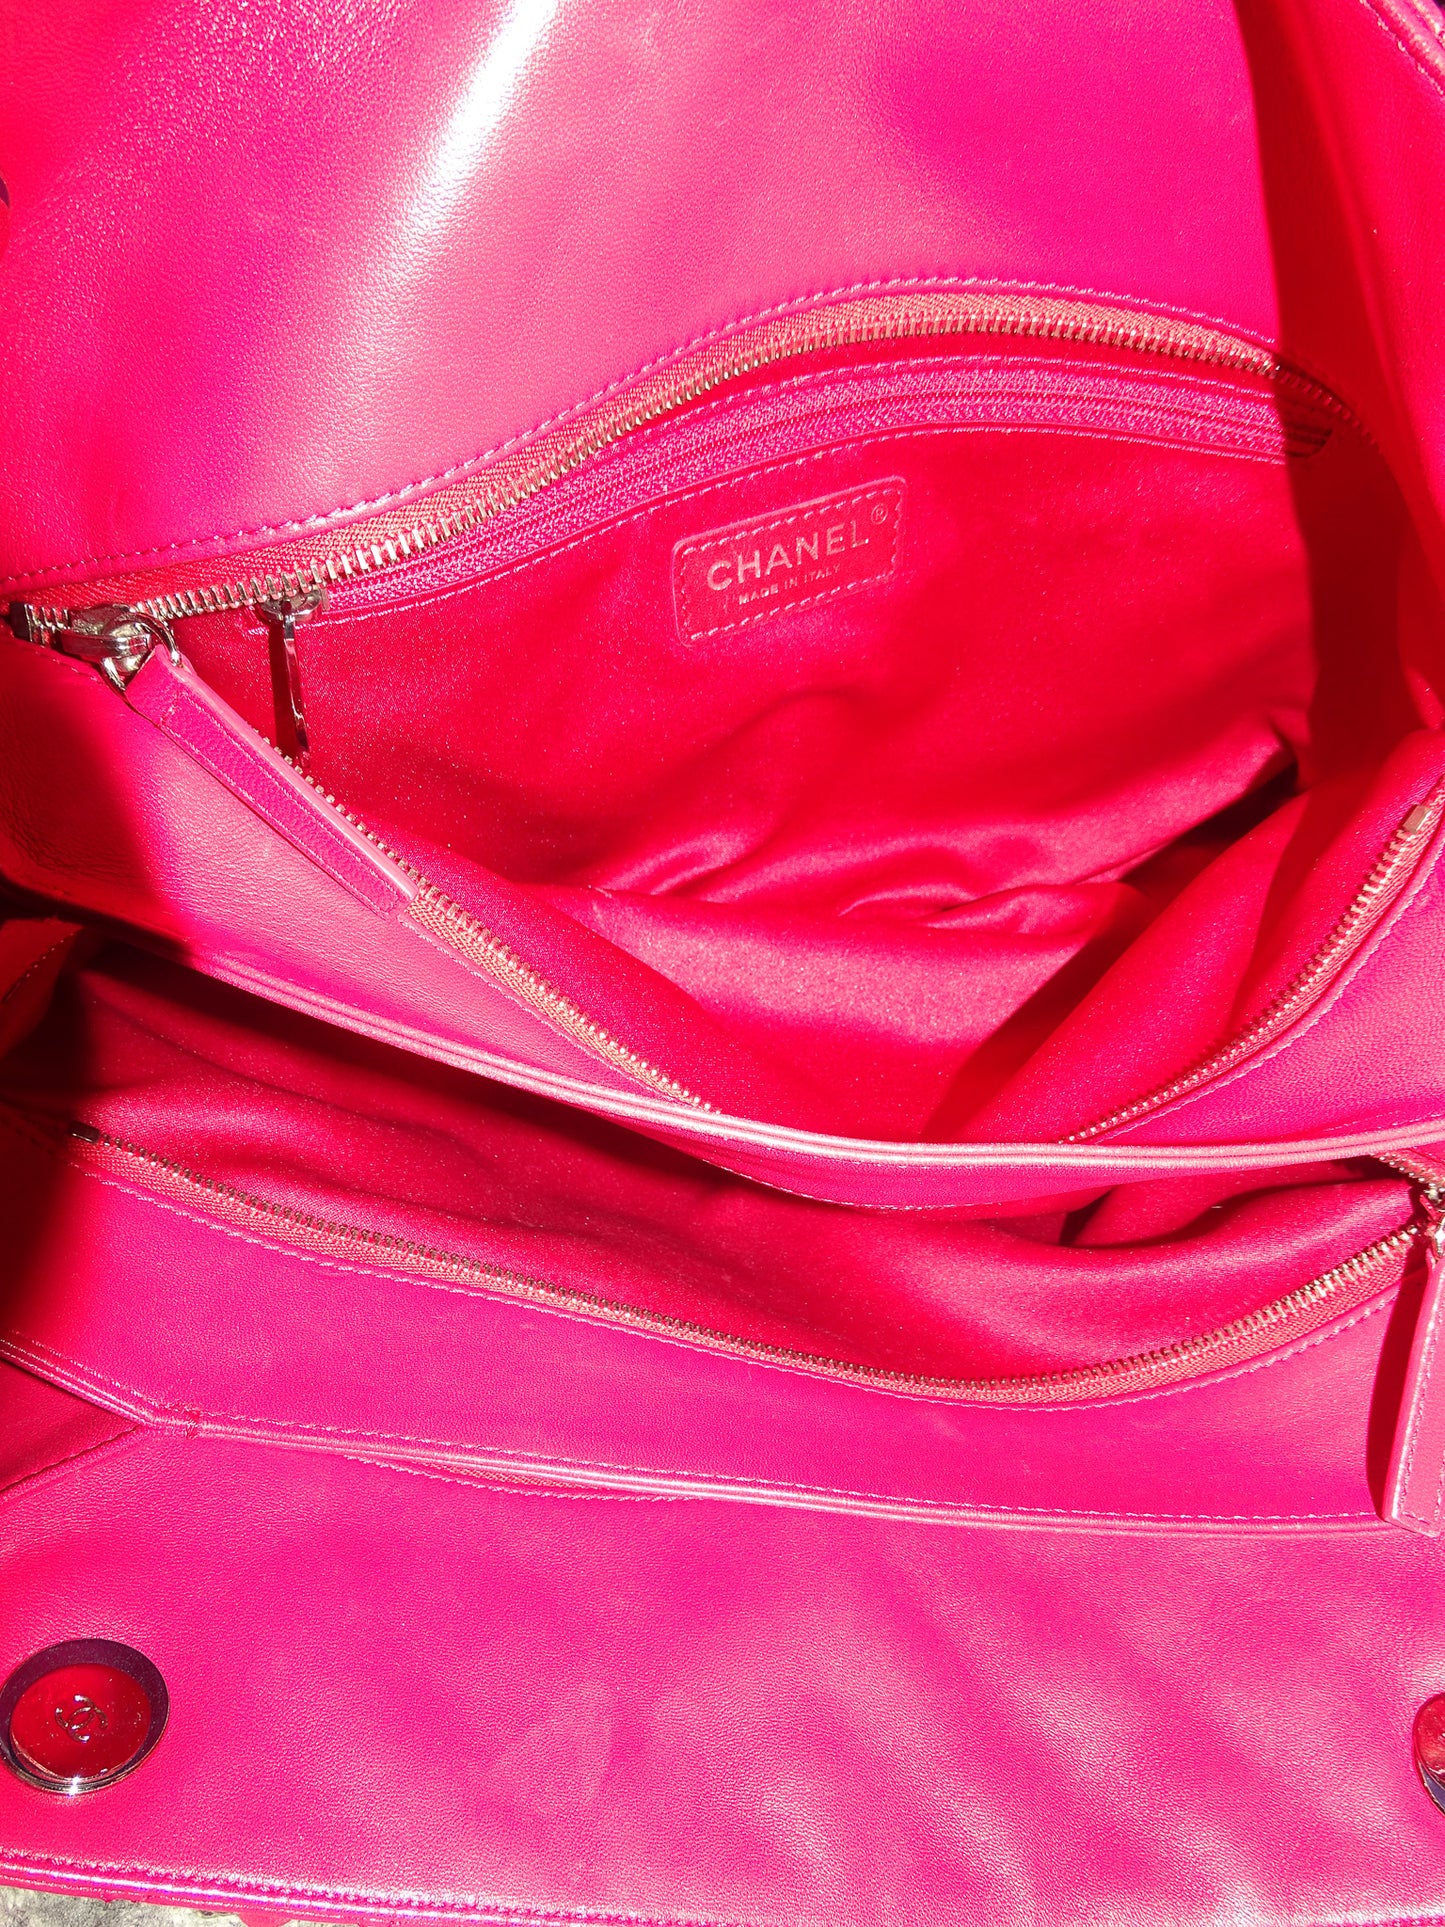 Chanel Hot Pink Soft Lambskin Double Chain Tote Bag 2014